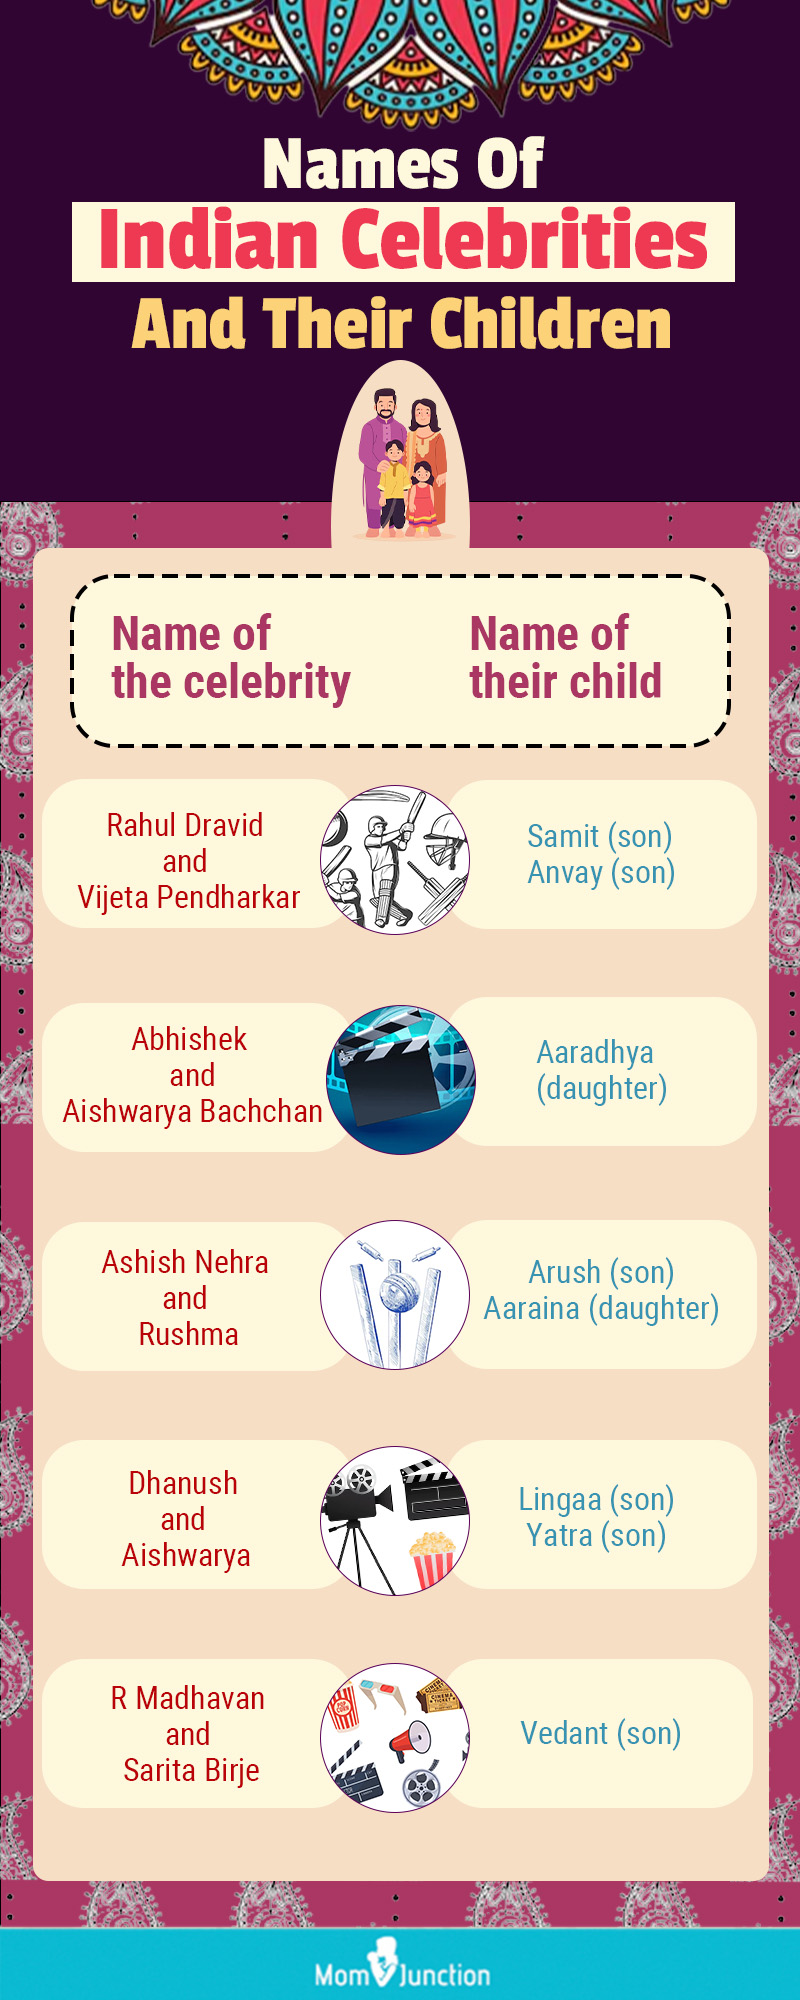 names of indian celebrities and their children (infographic)